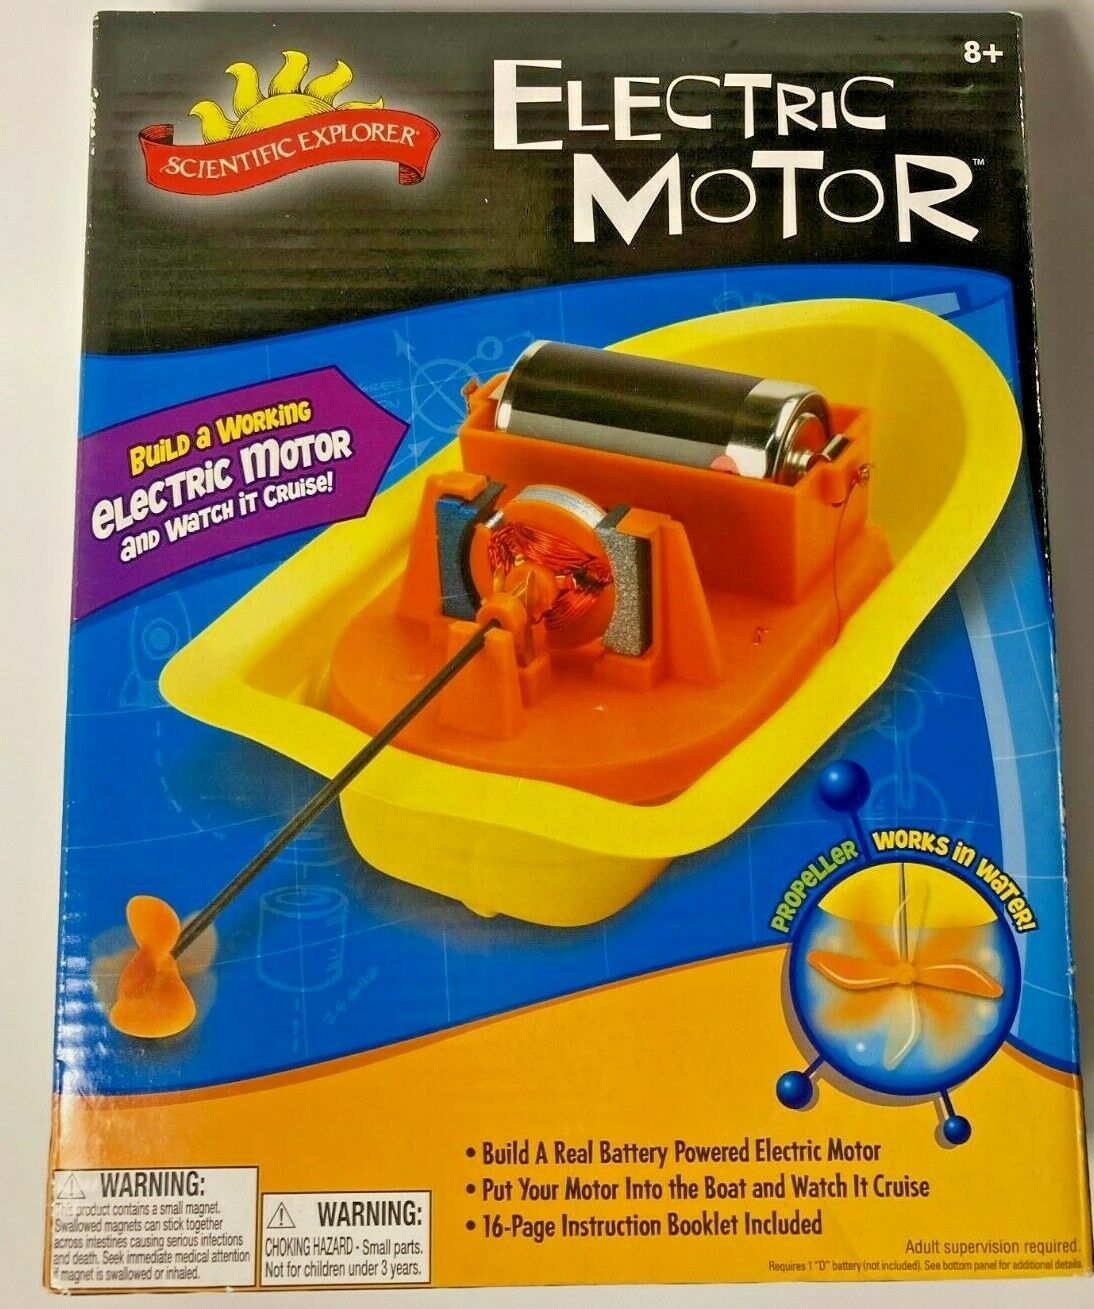 Scientific Explorer Electric Motor Build, New Educational Toy With Boat. F